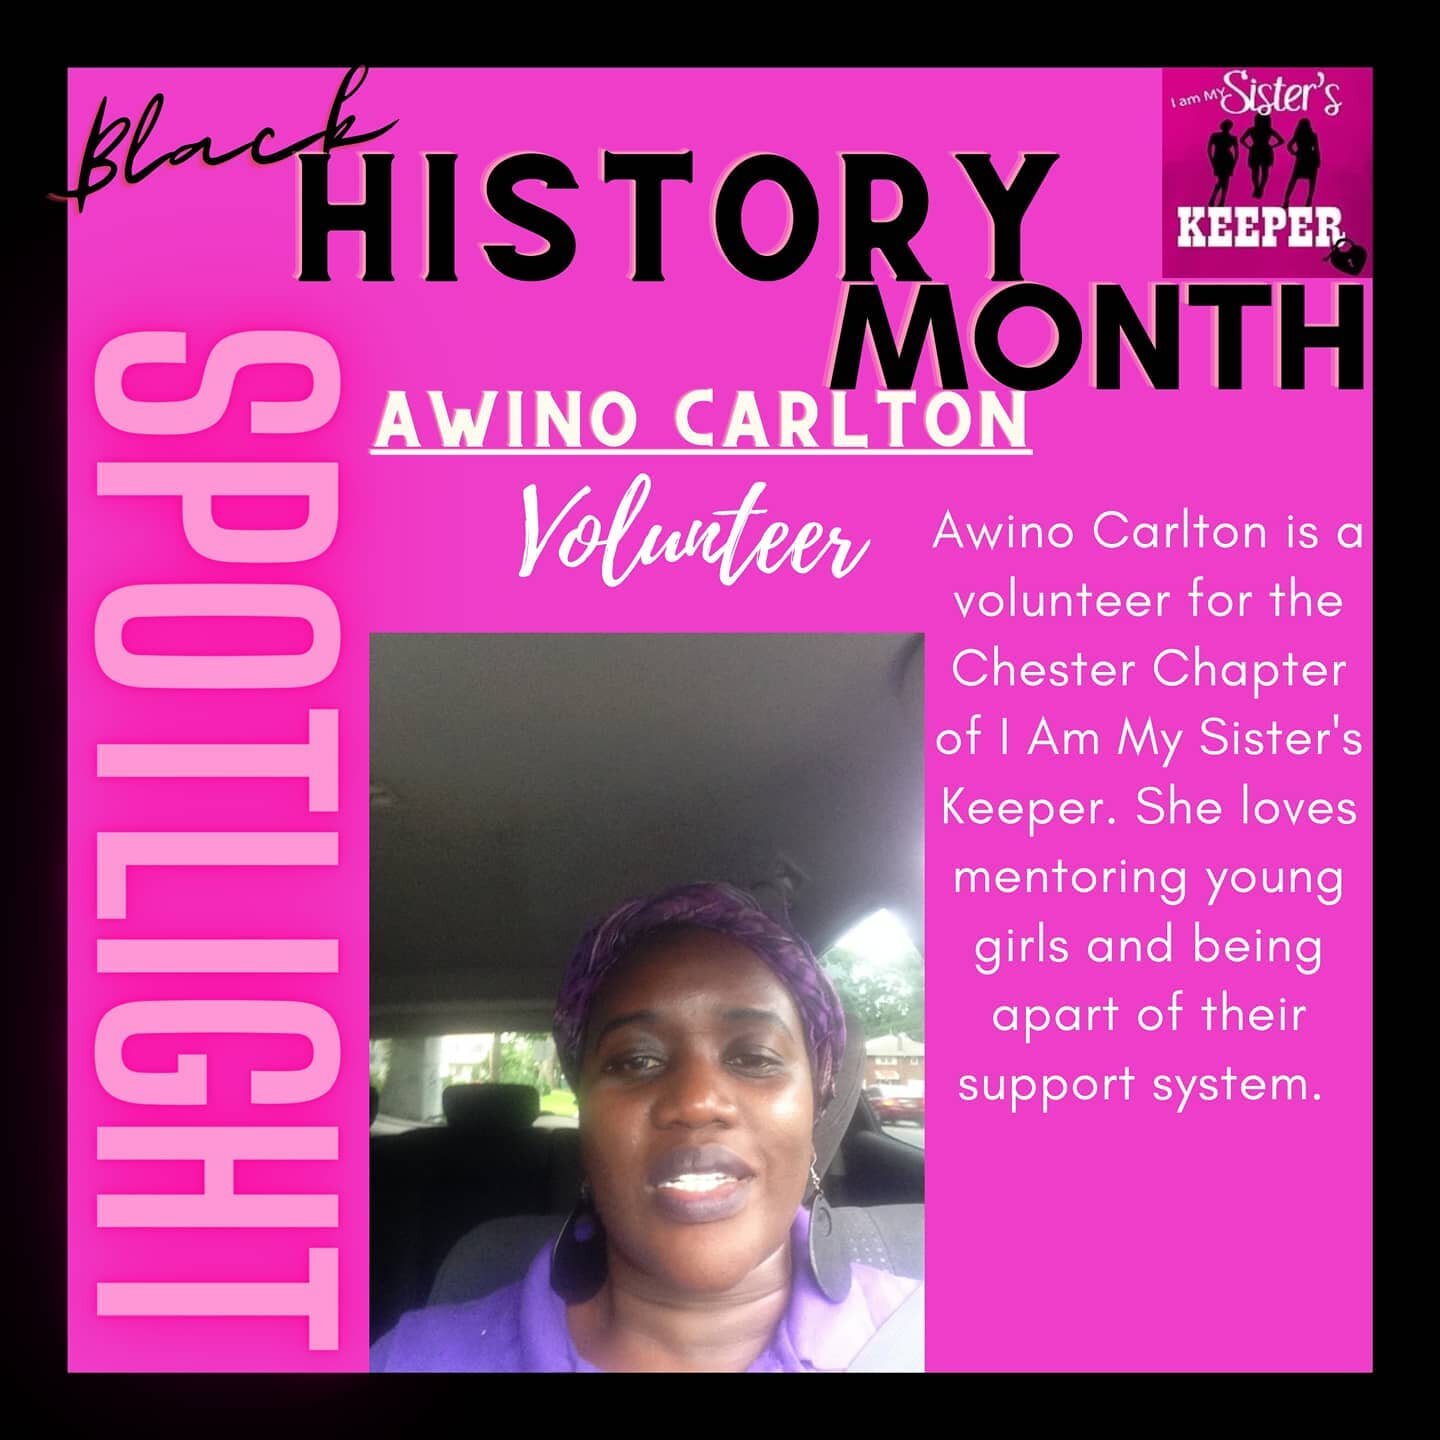 I Am My Sister's Keeper in Celebration of Black History Month we recognize Mrs Awino Carlton